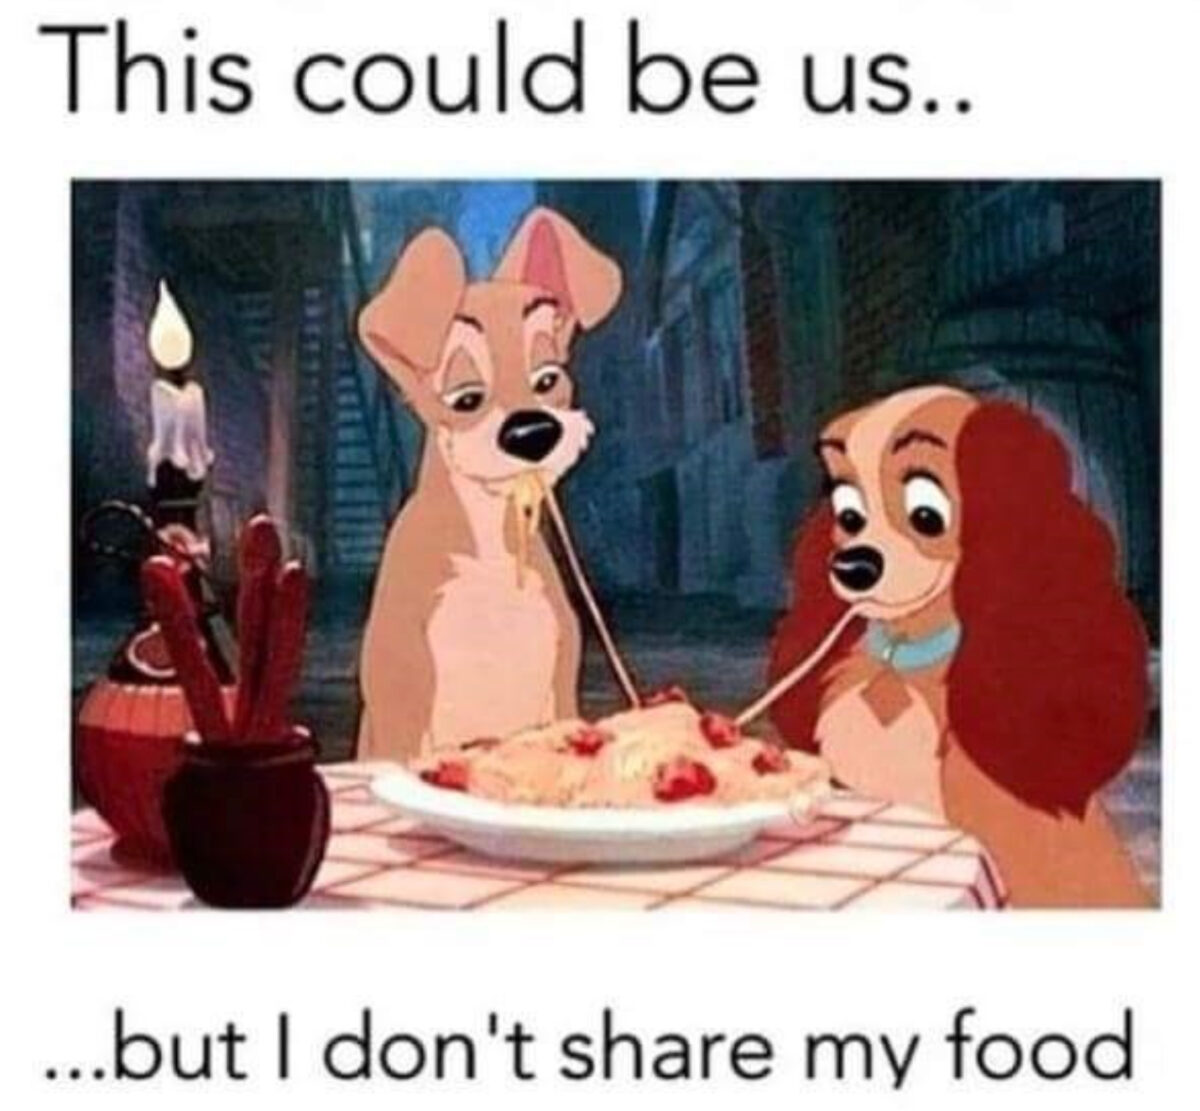 Lady and the Tramp meme - The Best Disney Memes On The Internet